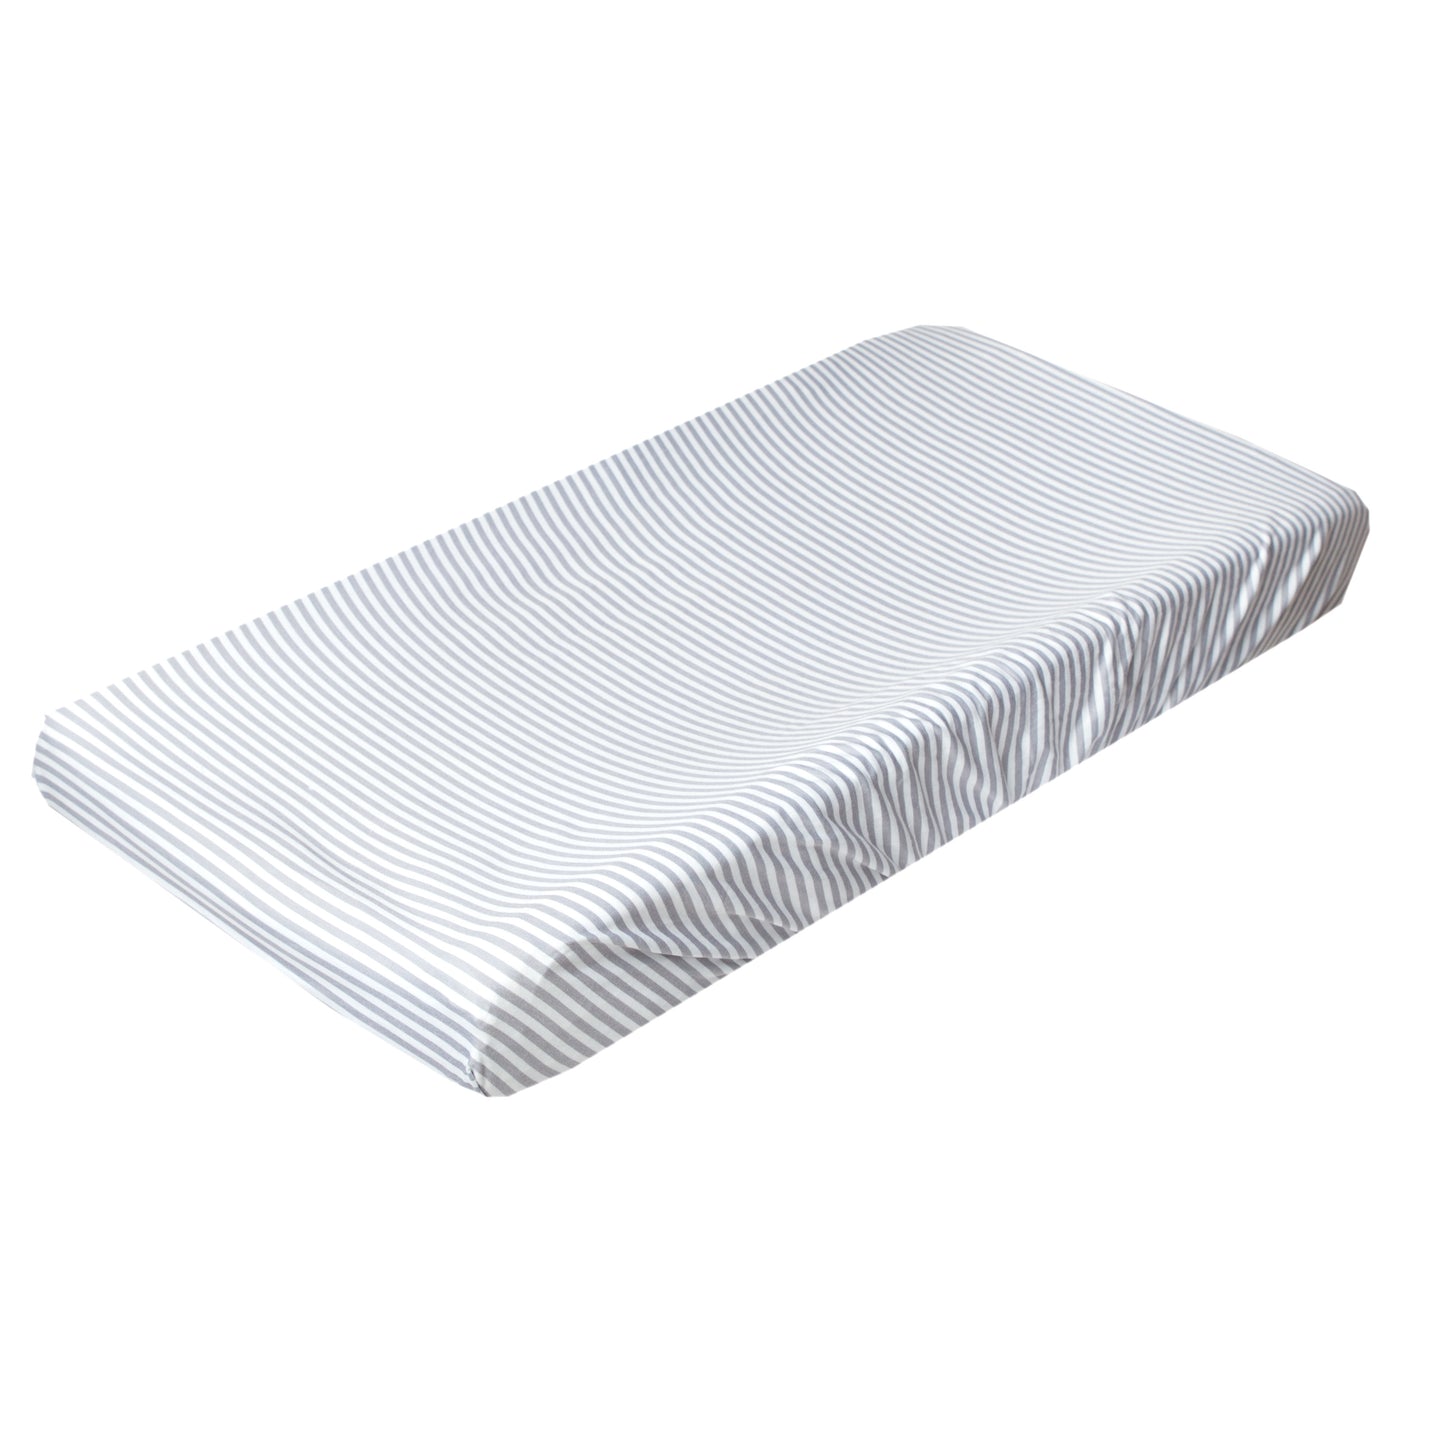 Everest Premium Knit Changing Pad Cover